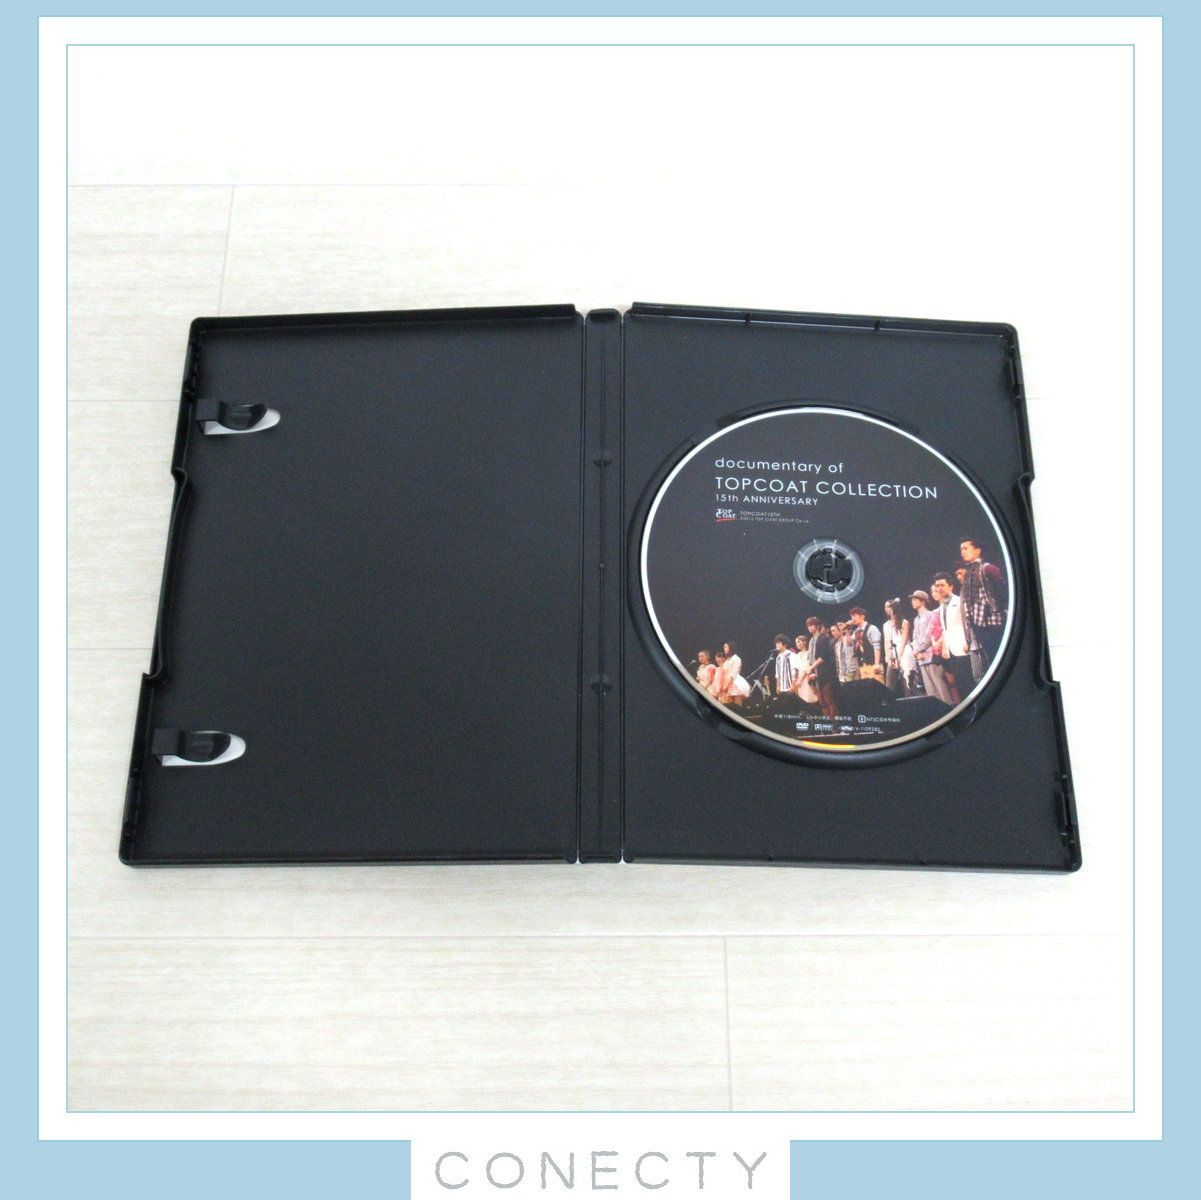 DVD★documentary of TOPCOAT COLLECTION 15th ANNIVERSARY(6135